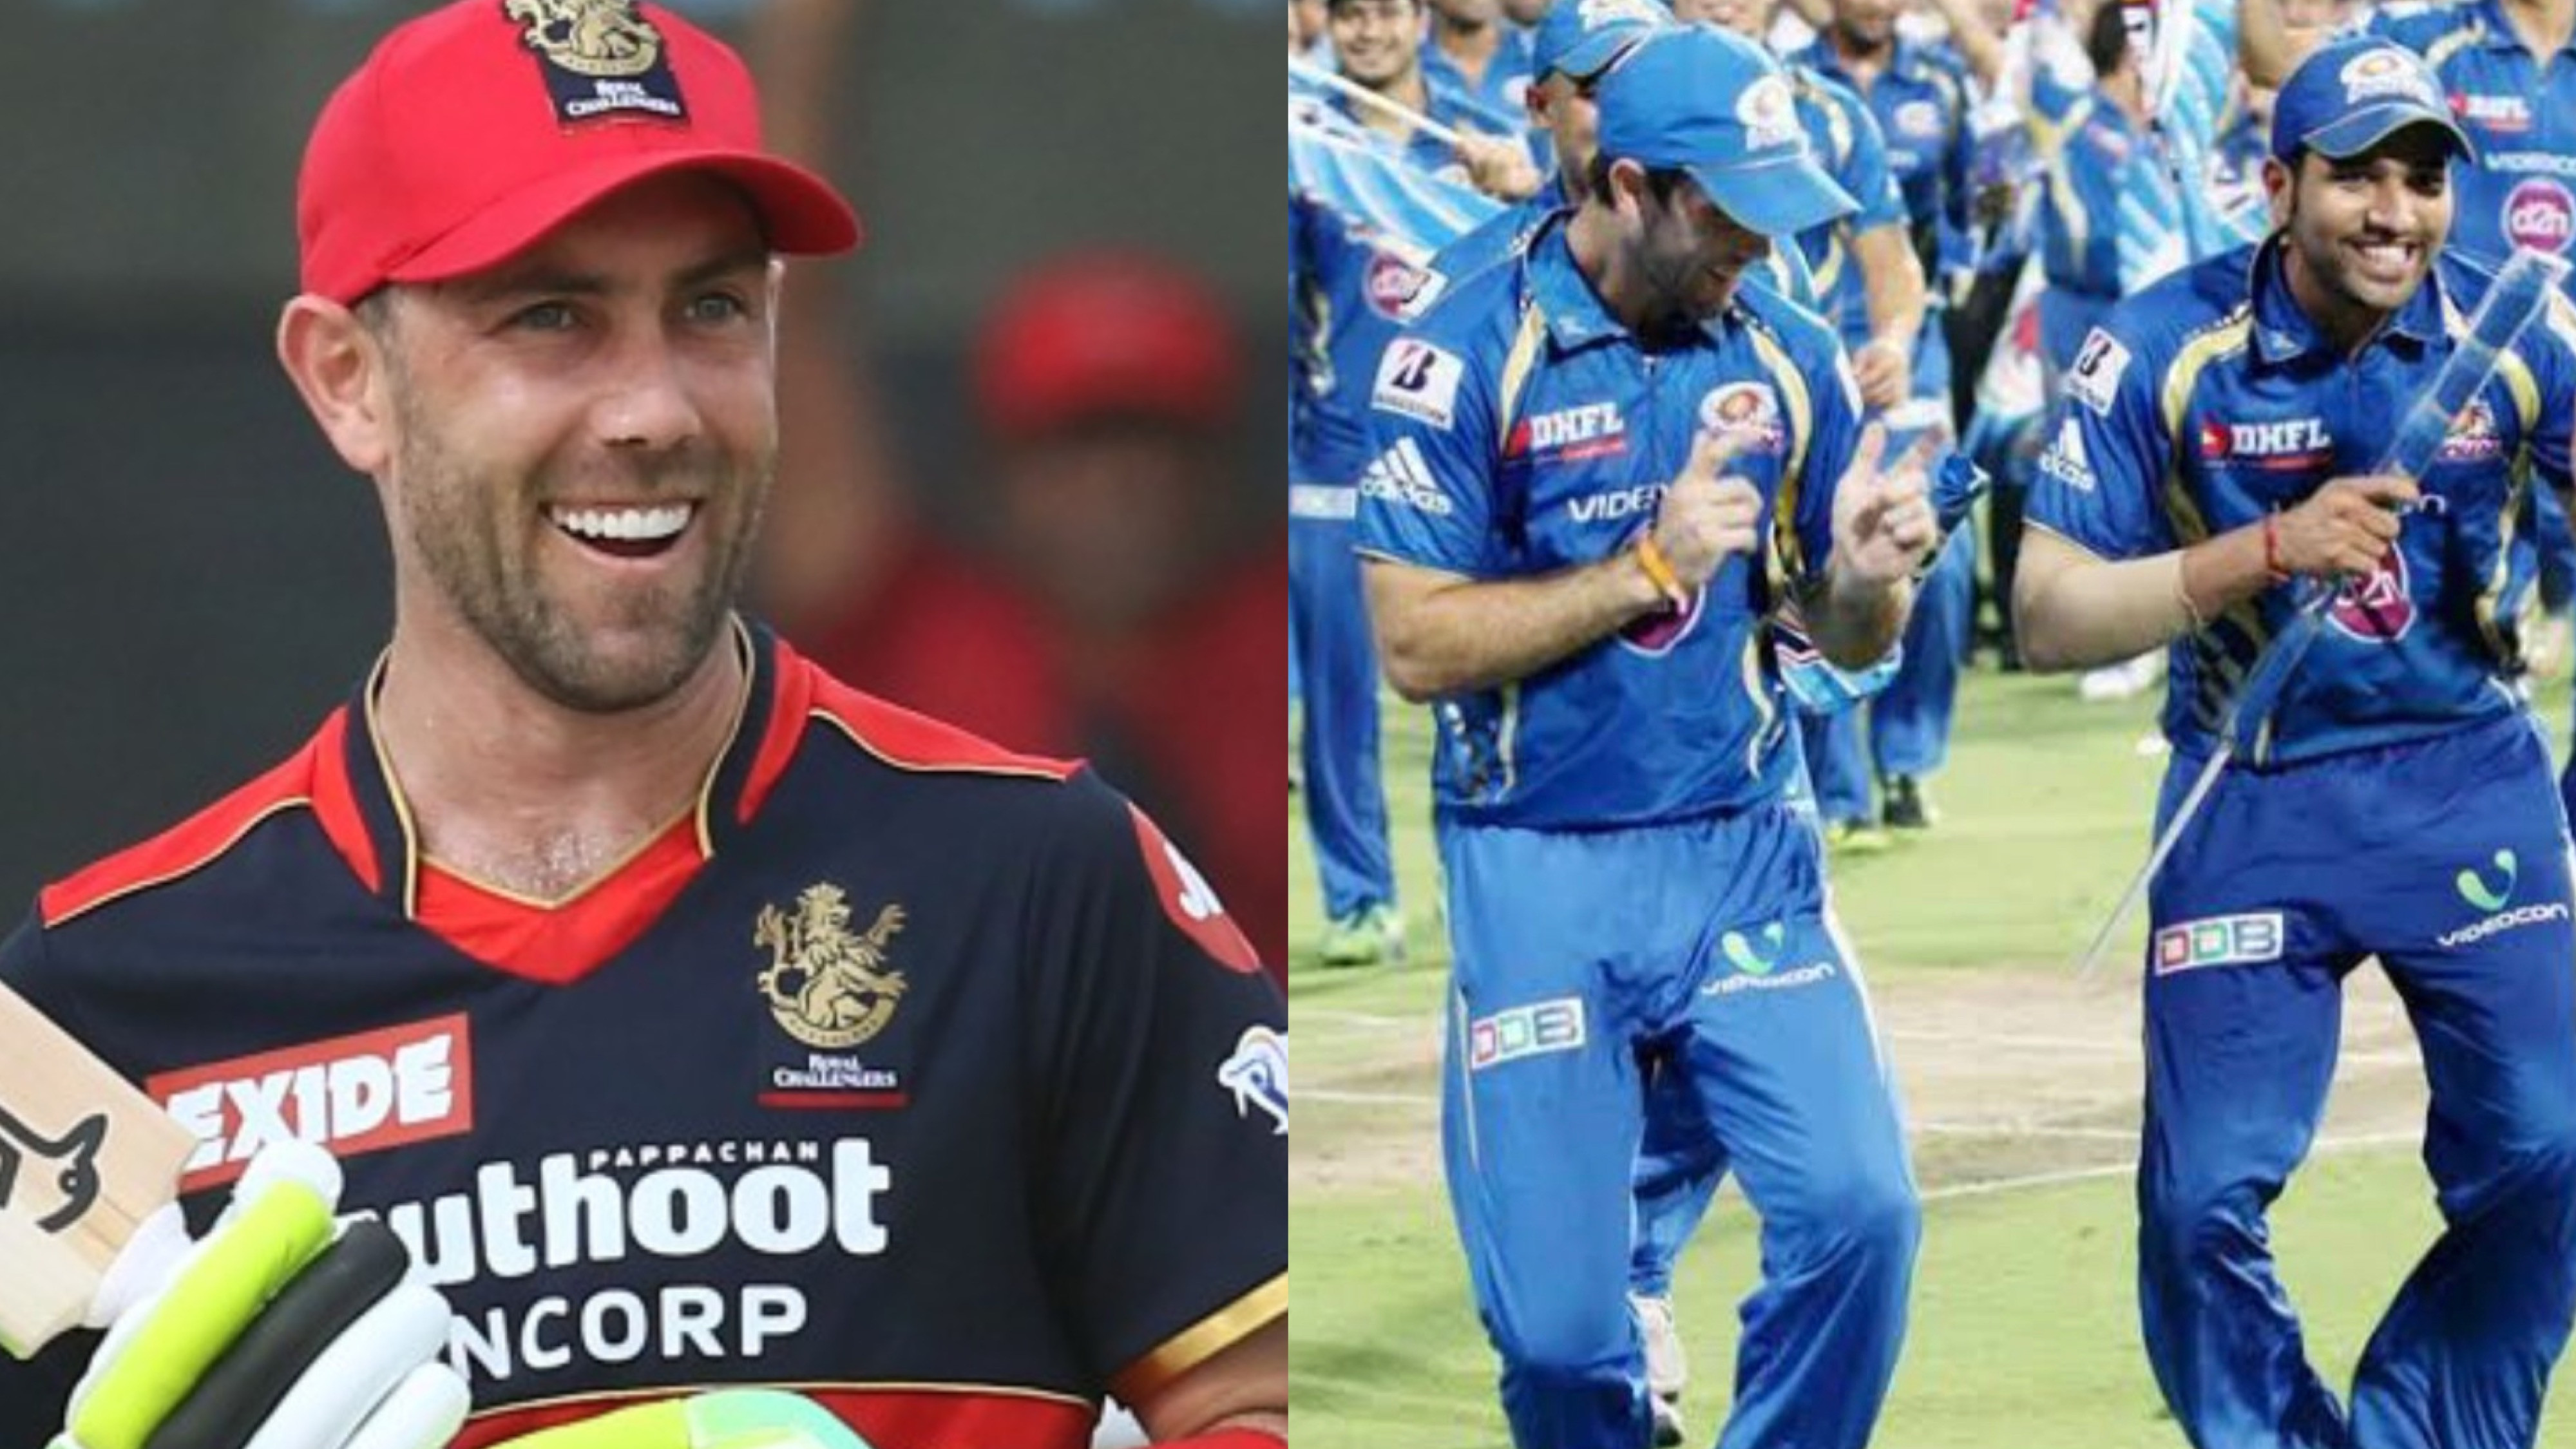 IPL 2022: “C'mon Mumbai Indians!”- RCB’s Glenn Maxwell cheers for MI in their match against DC